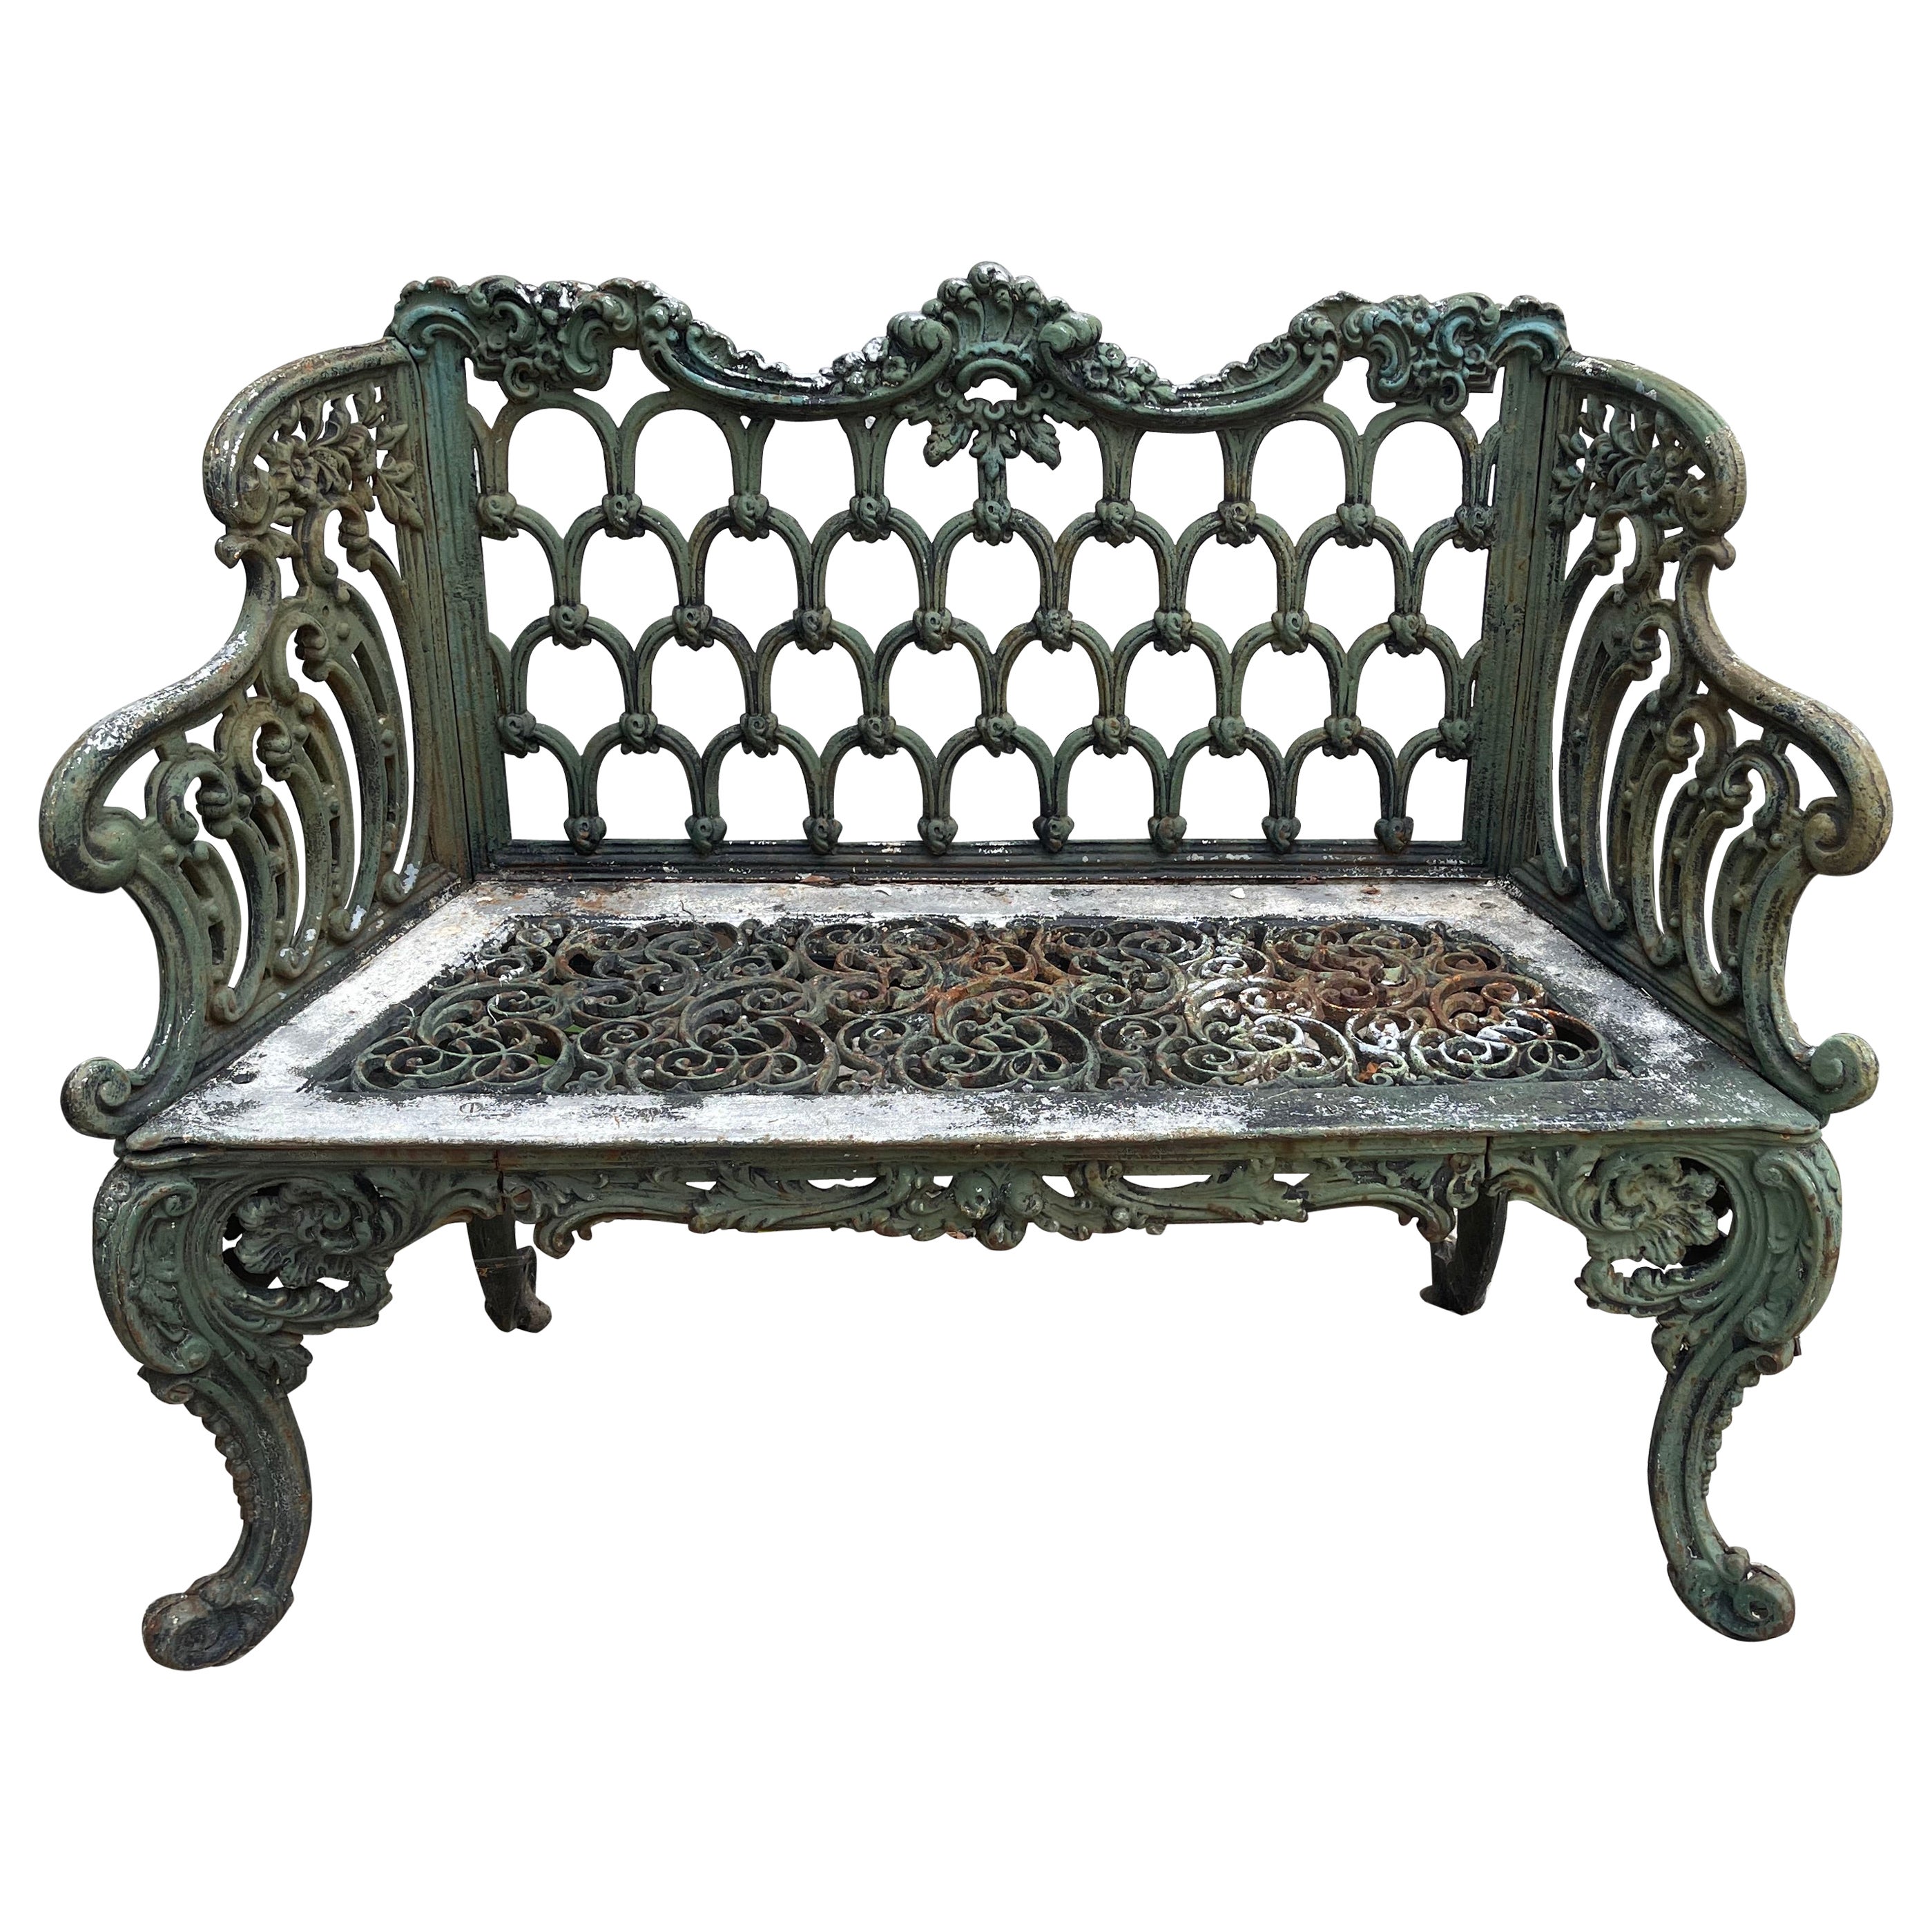 Rococo Revival and Gothic Revival Cast Iron "White House Rose Garden Bench" For Sale